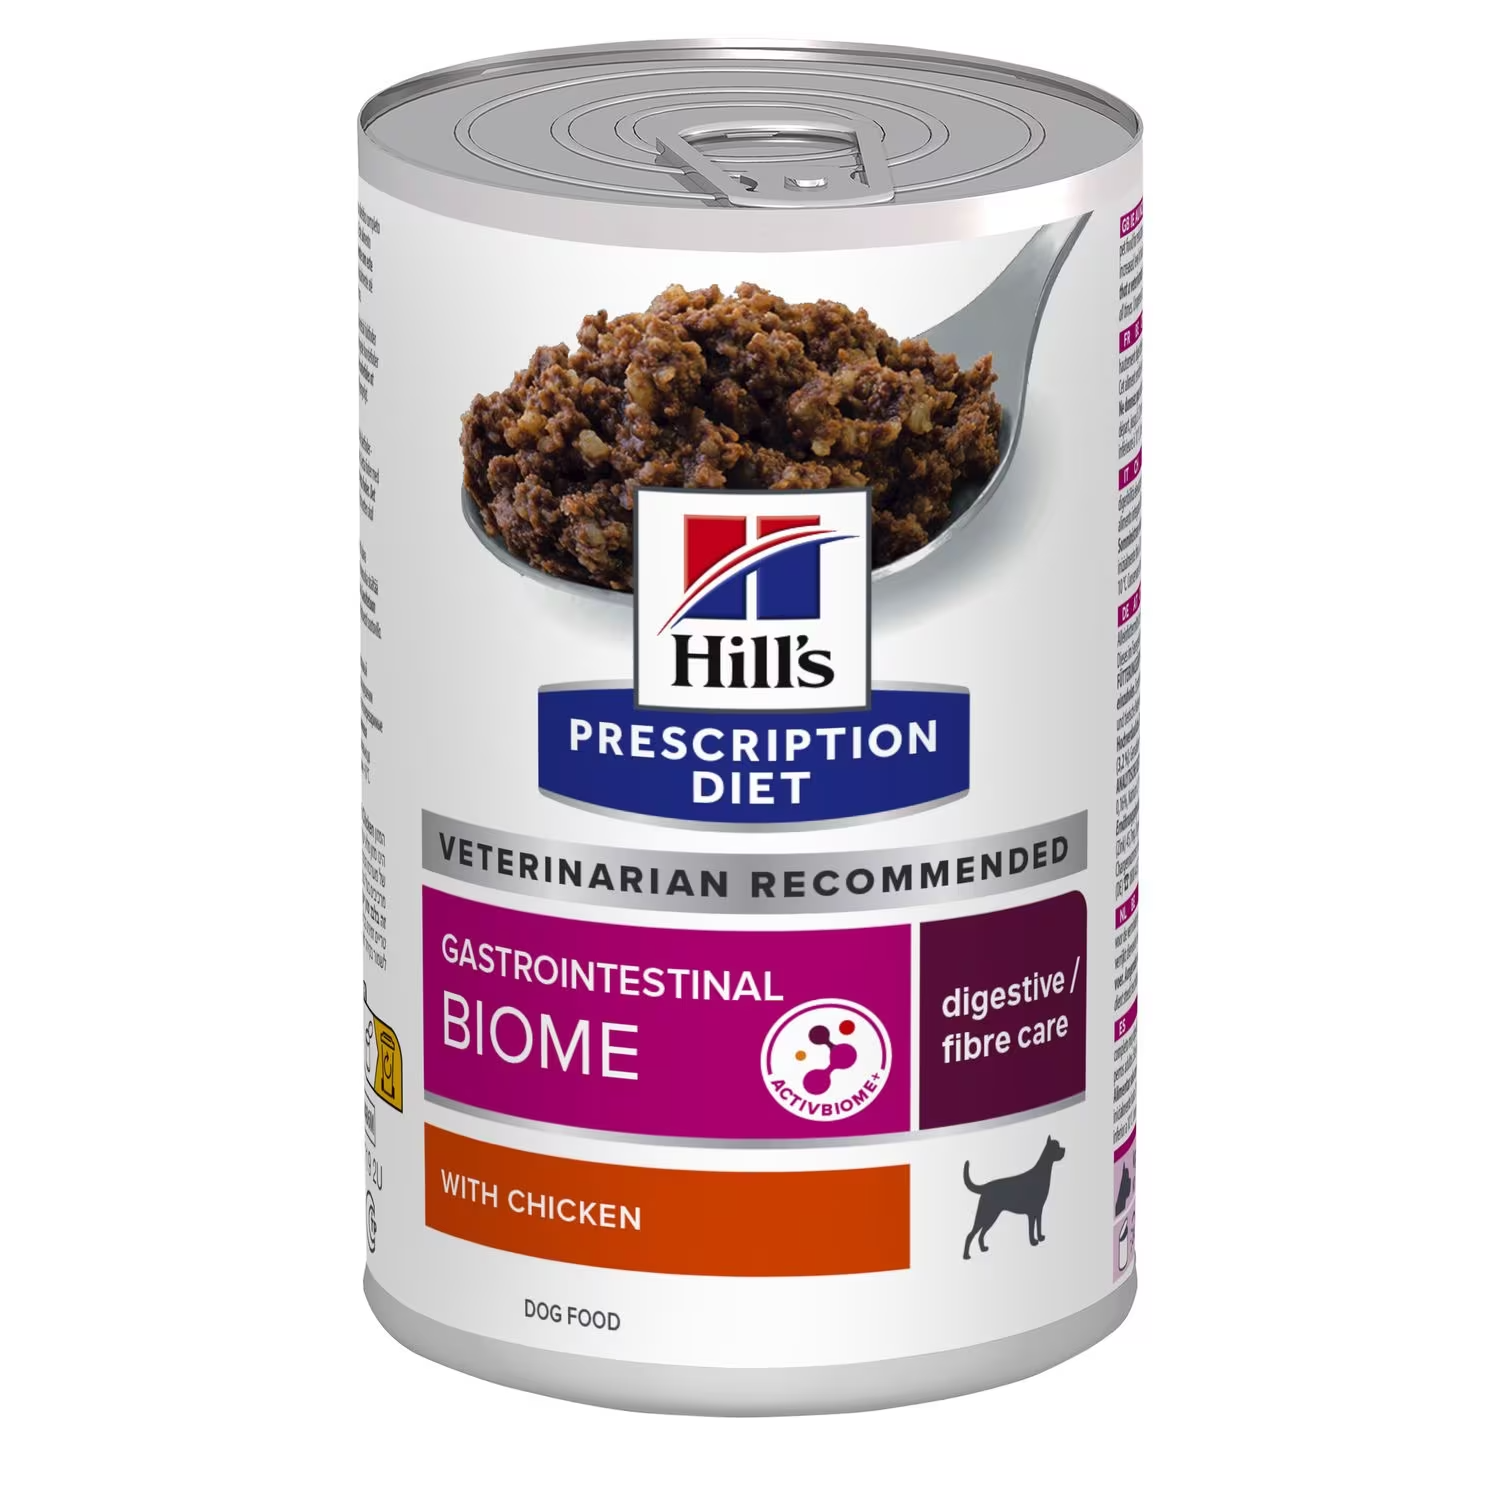 Hill's Prescription Diet Canine Gastrointestinal Biome Digestive & Fibre Care With Chicken Can 12 x 370g